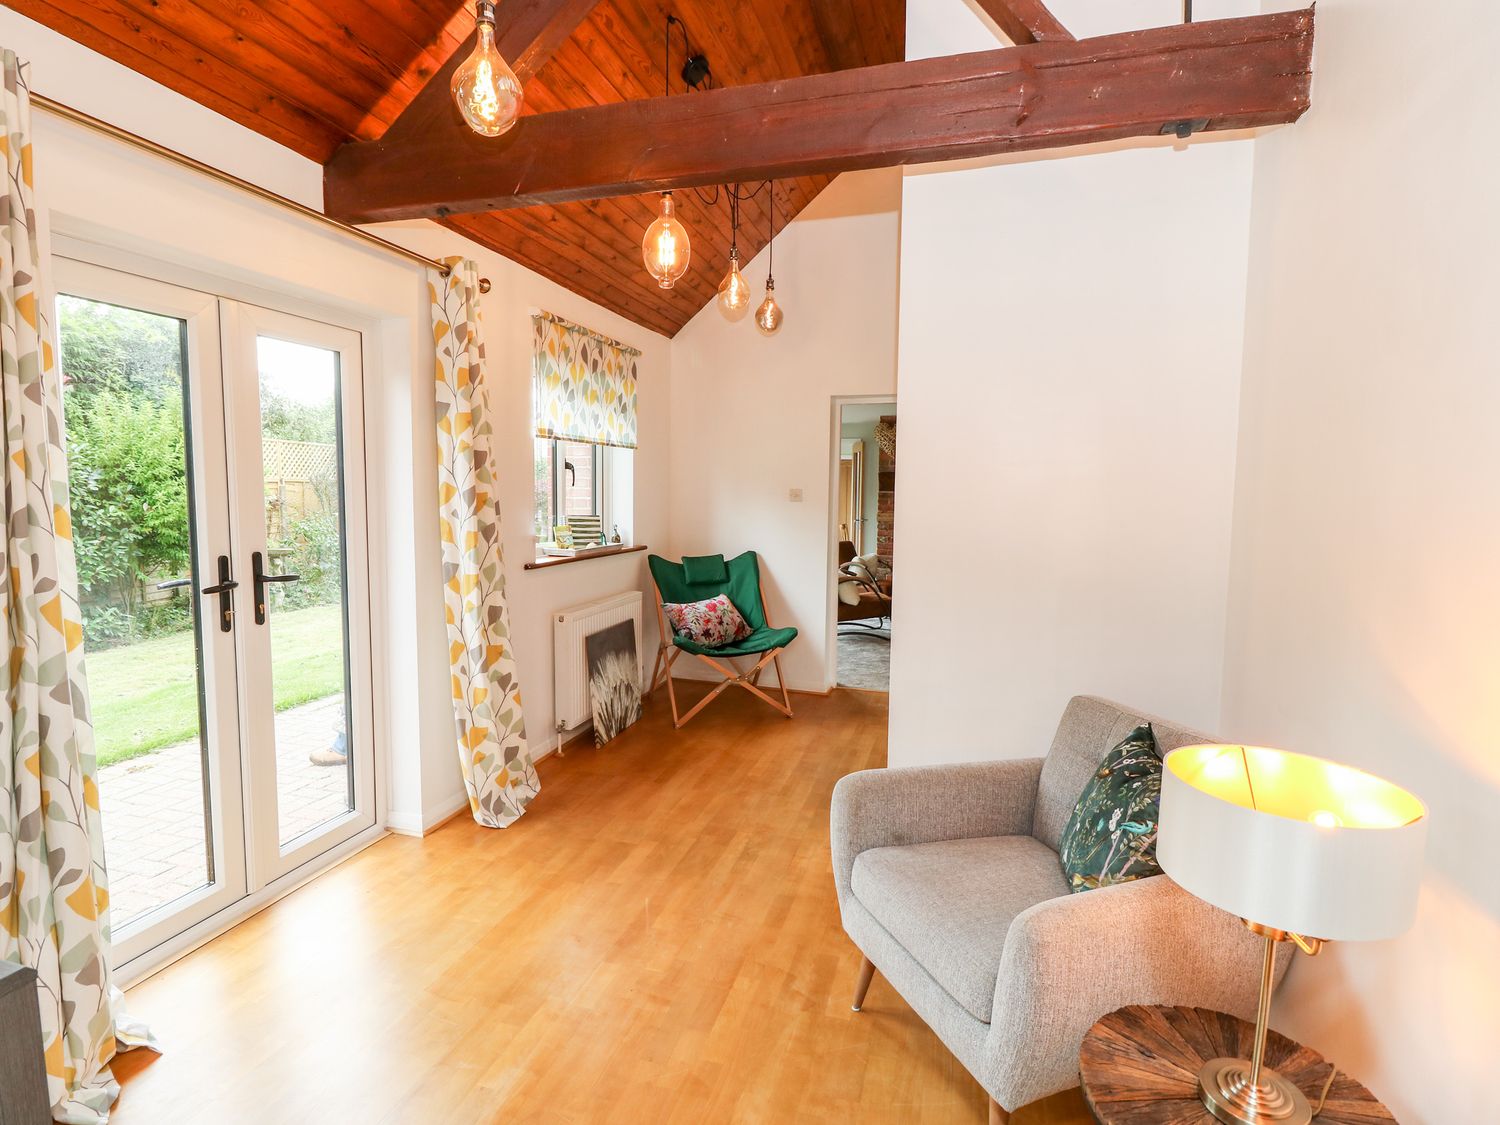 Northern Byre rests in Sopley, Hampshire. Four-bedroom barn conversion, resting near amenities. Pets